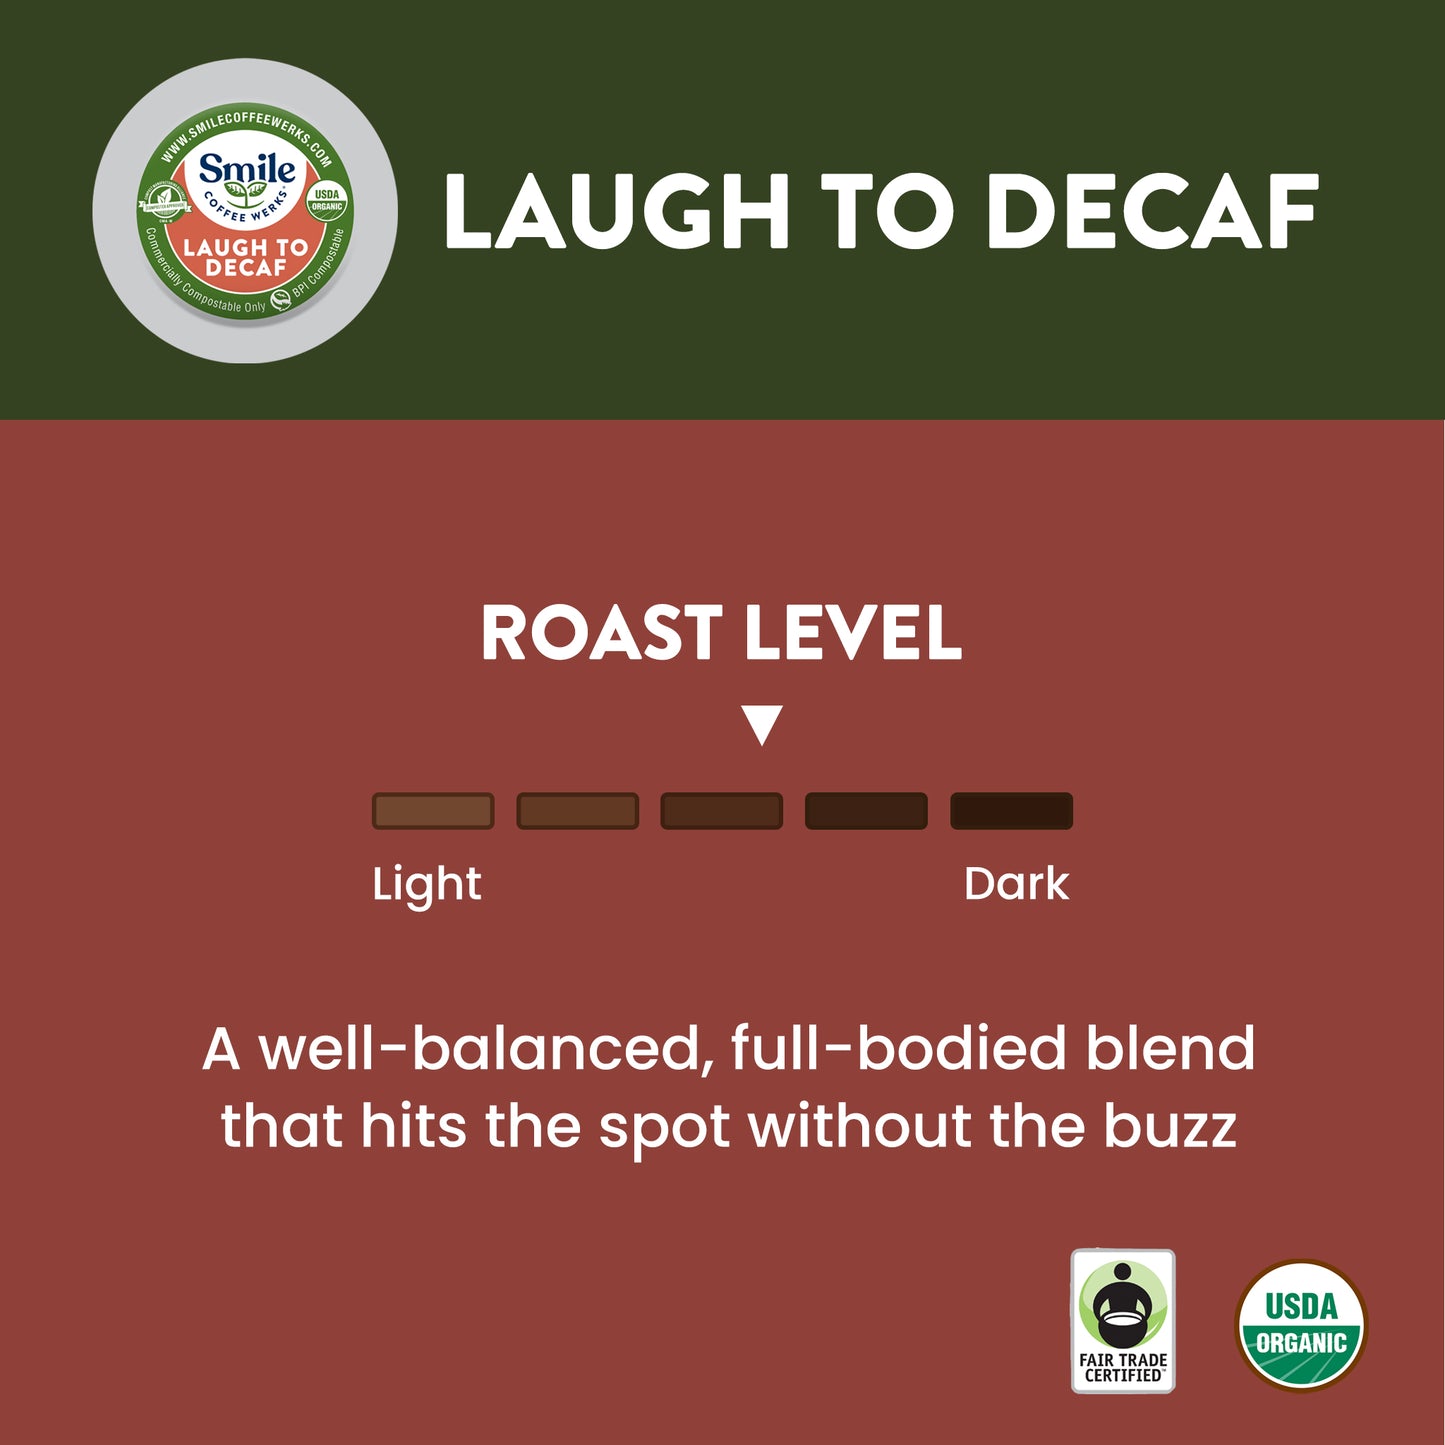 Laugh to Decaf